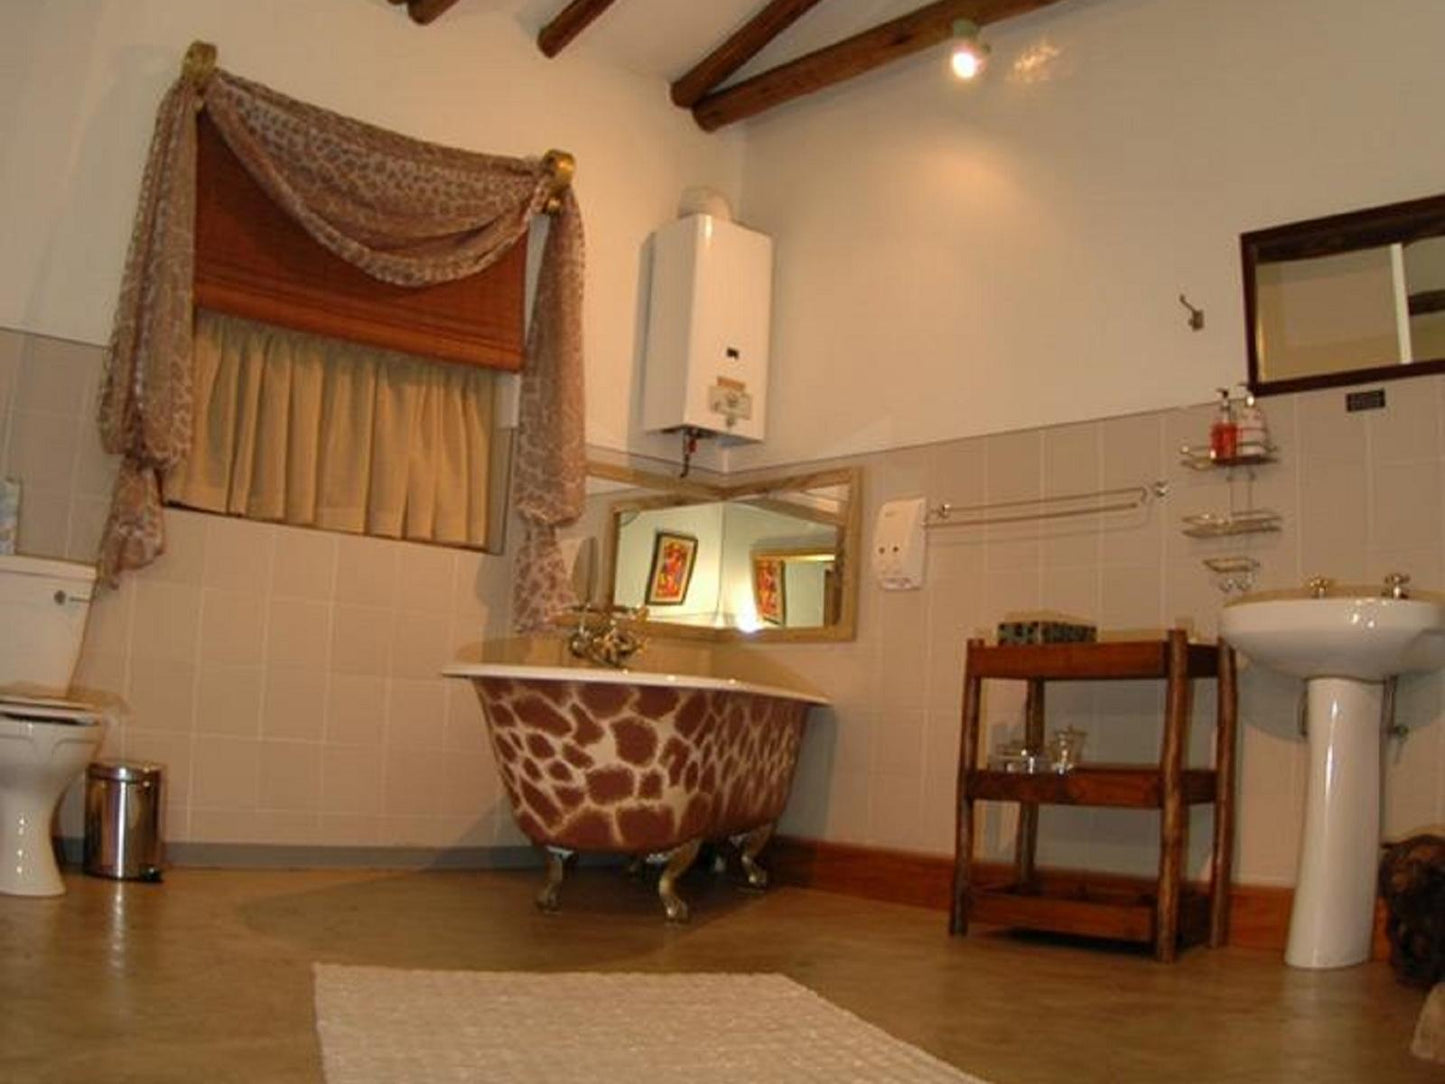 Luxury Room 1 - Giraffe @ Roosfontein Bed And Breakfast And Conference Room